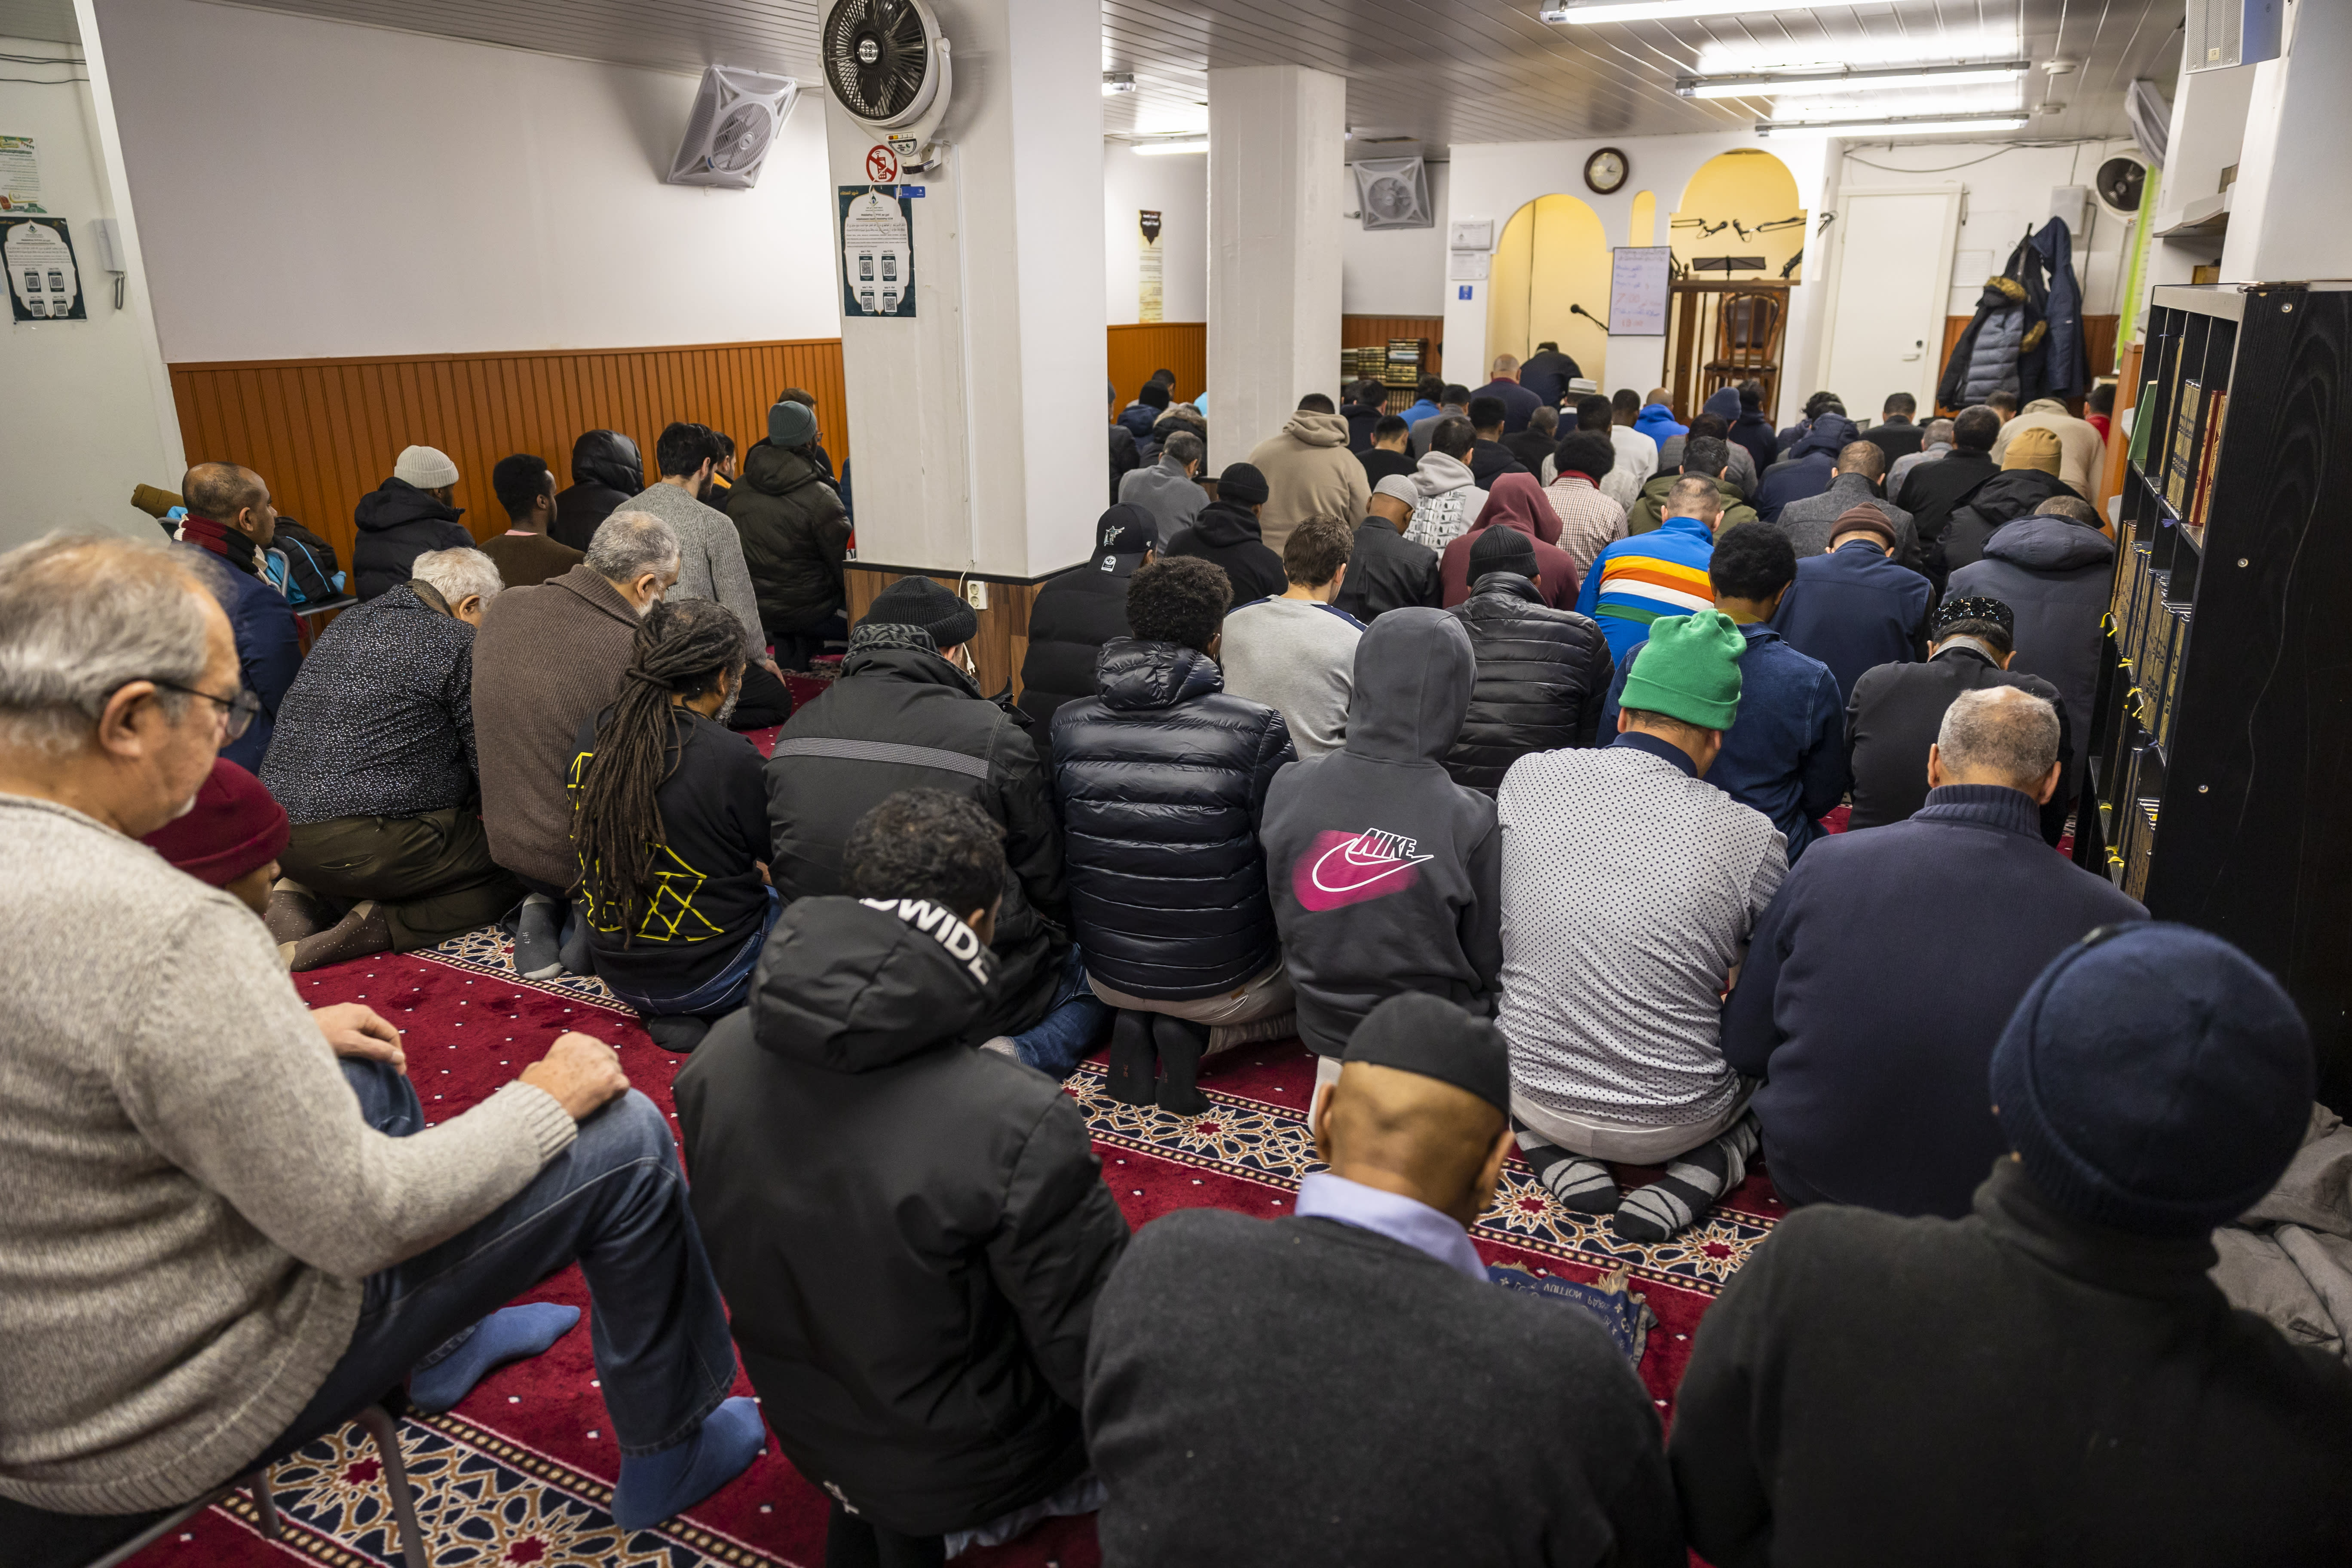 The Islamic community in Finland demands concrete actions from the government "zero tolerance" about racism